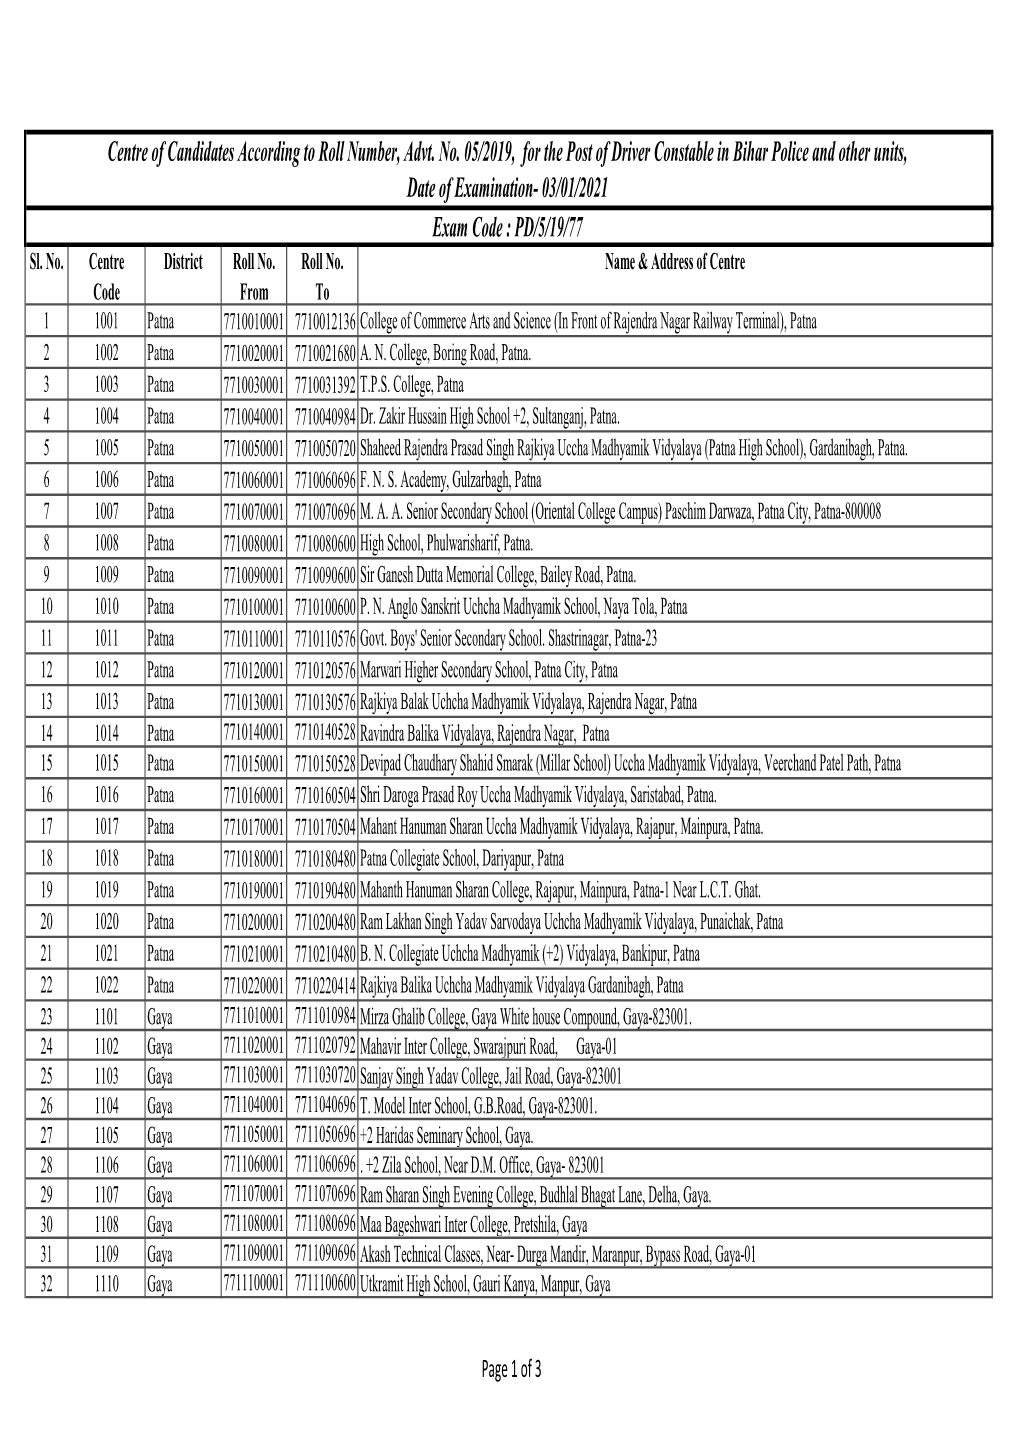 Centre of Candidates According to Roll Number, Advt. No. 05/2019, For